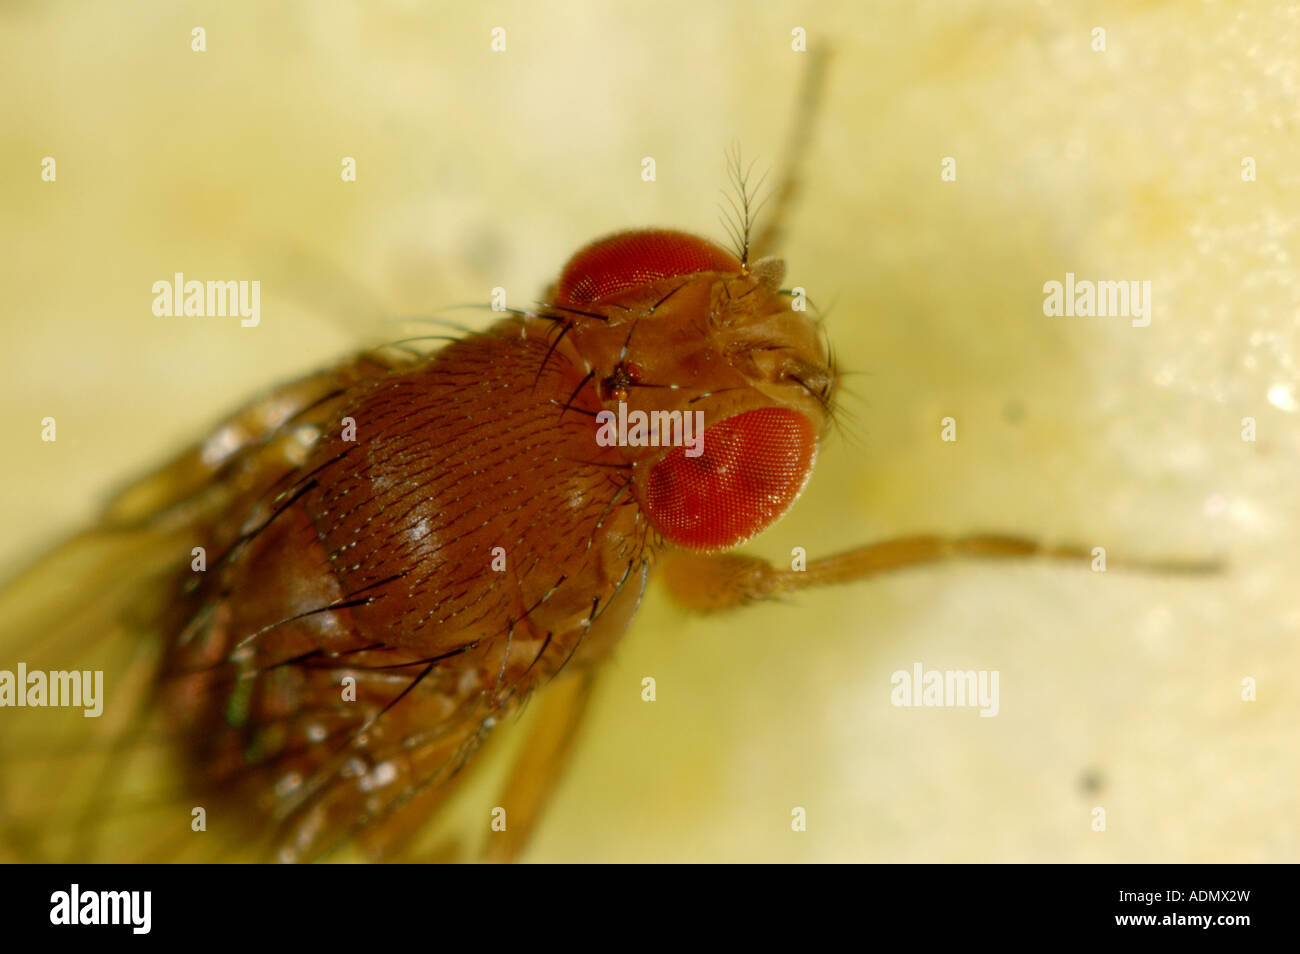 Adult fruit fly Drosophila sp a genus used for experiments because of their rapid breeding cycle Stock Photo